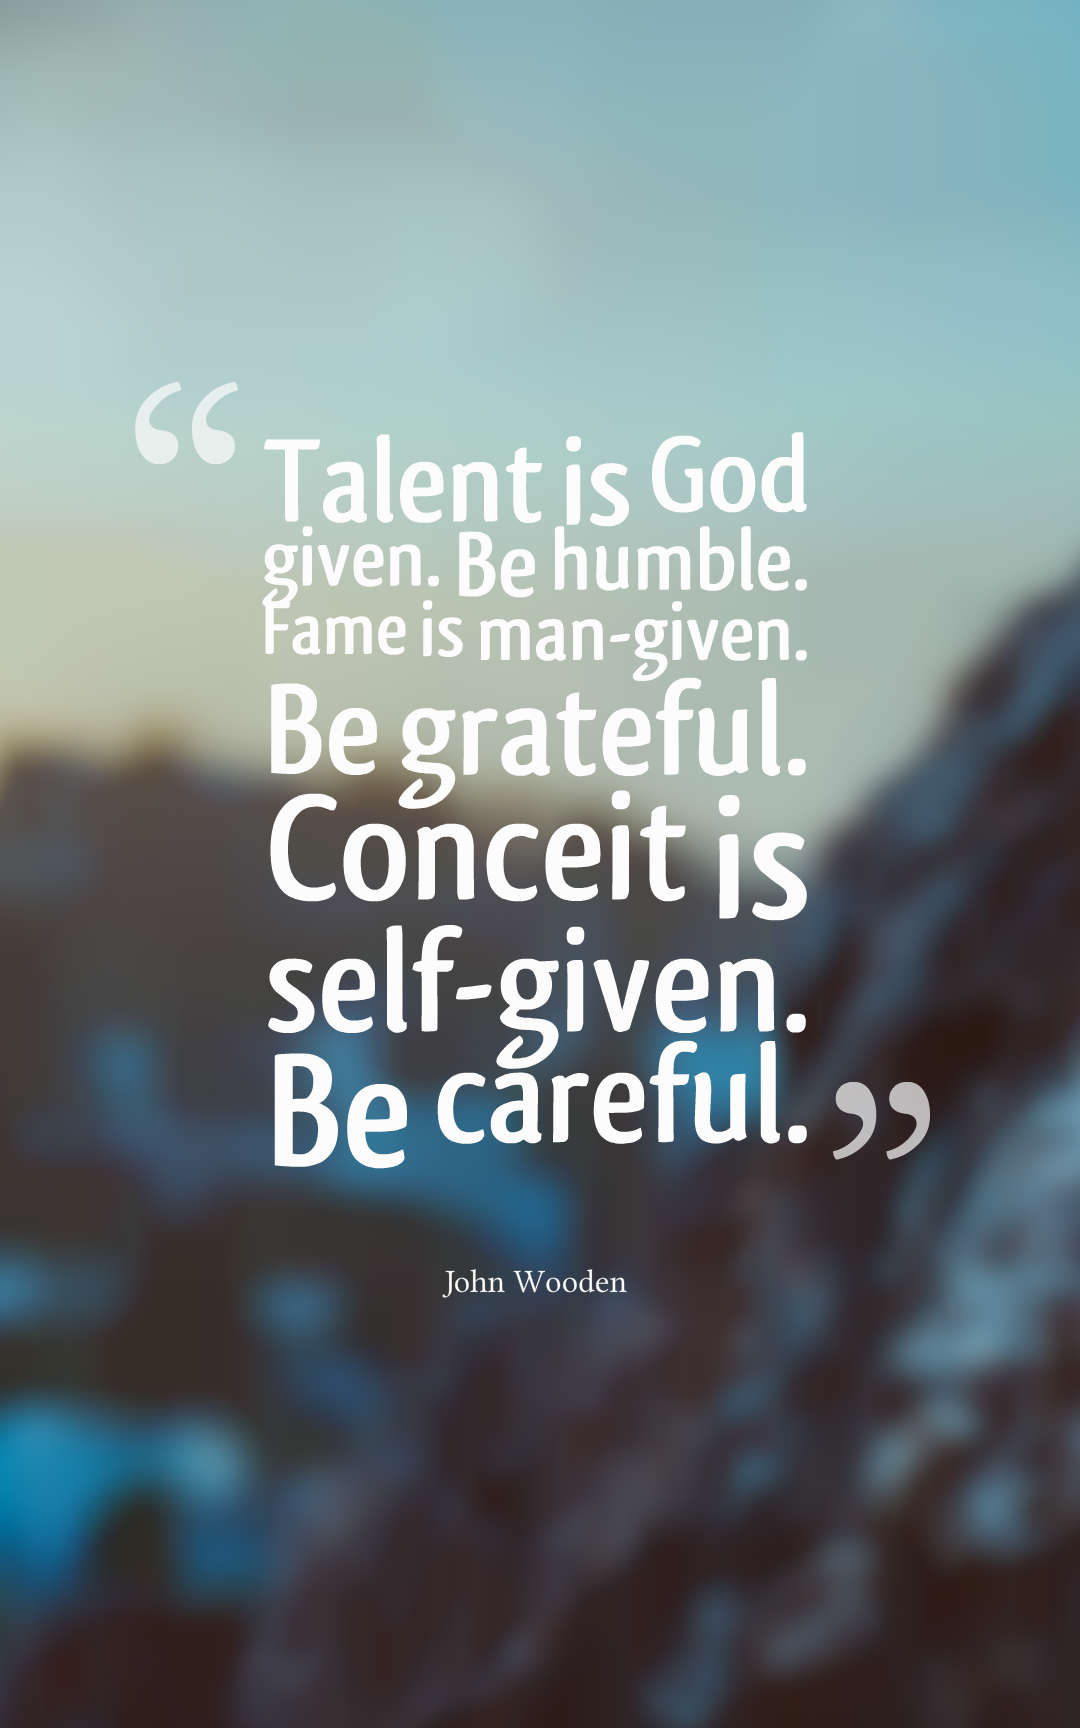 Talent is God given. Be humble. Fame is man-given. Be grateful. Conceit is self-given. Be careful.